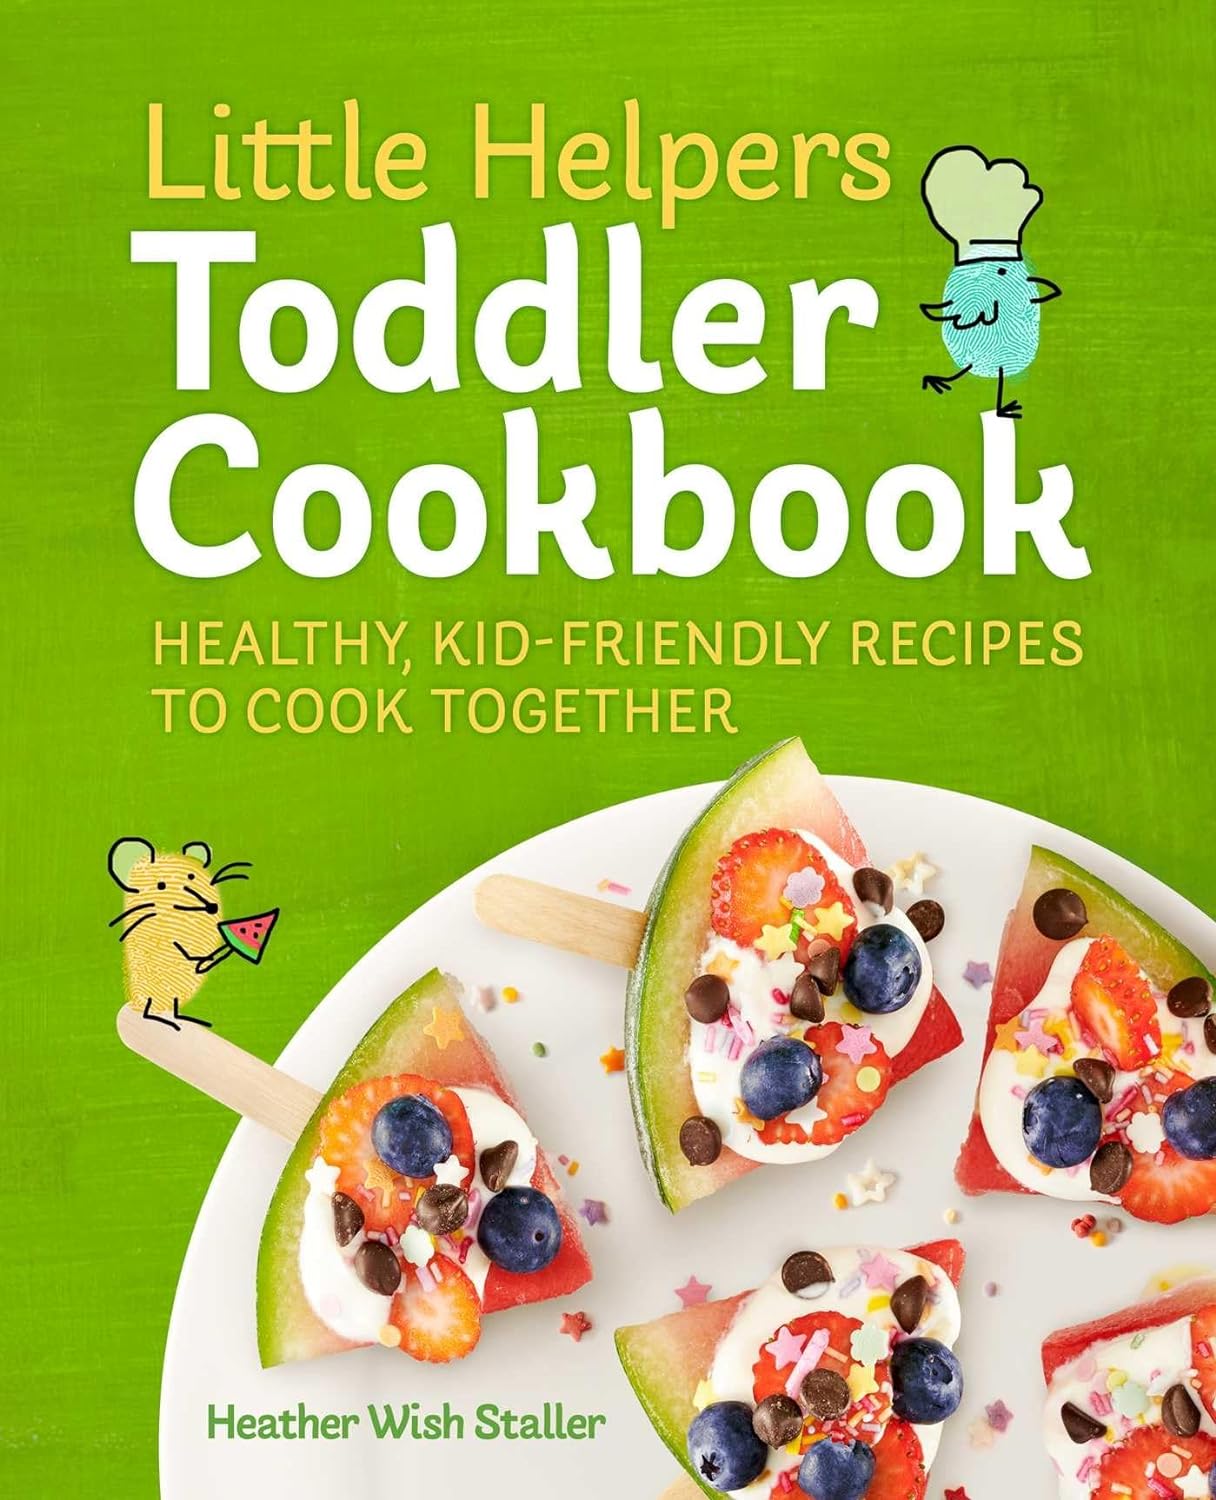 Little Helpers Toddler Cookbook Review